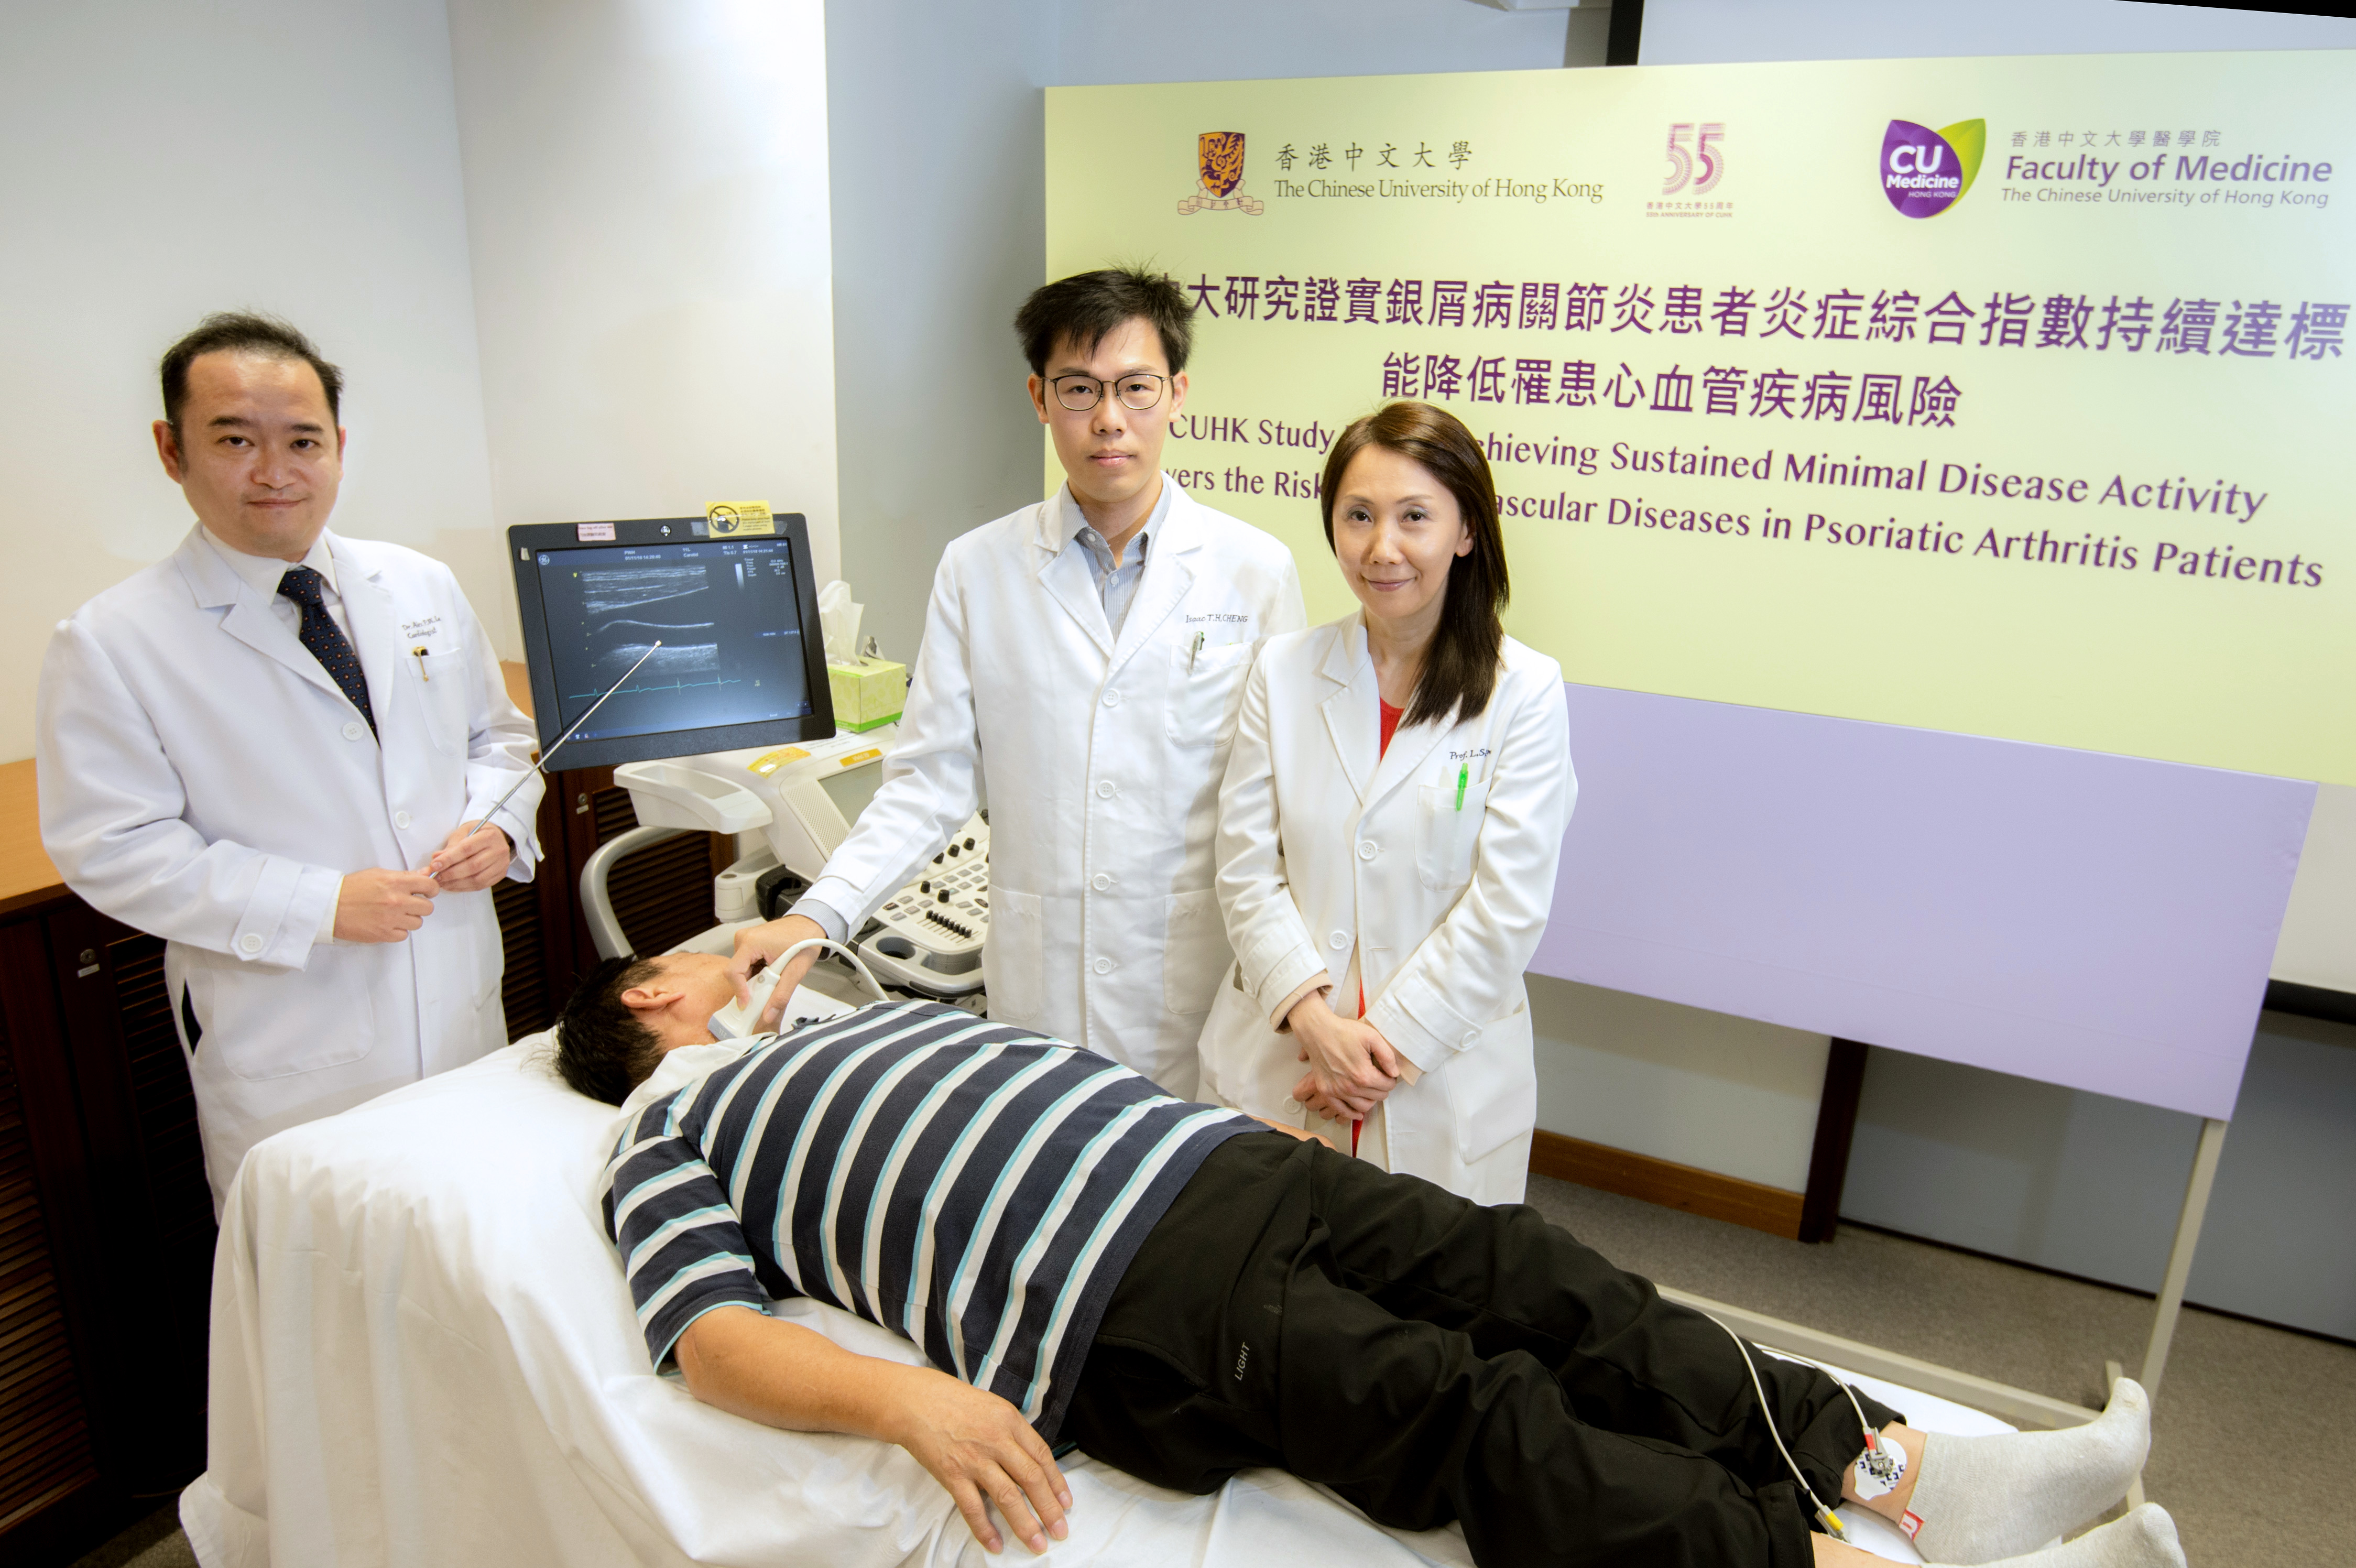 A study conducted by the Faculty of Medicine at CUHK shows that the risk of cardiovascular diseases in psoriatic arthritis patients can be lowered by achieving sustained minimal disease activity. This picture shows the research team demonstrating the Carotid Intima-Media Thickness measurement. (From left) Dr. Alex Pui Wai LEE, Associate Professor of the Division of Cardiology; Mr Isaac CHENG, research assistant; and Professor Lai Shan TAM, Head of Division of Rheumatology, Department of Medicine and Therapeutics.